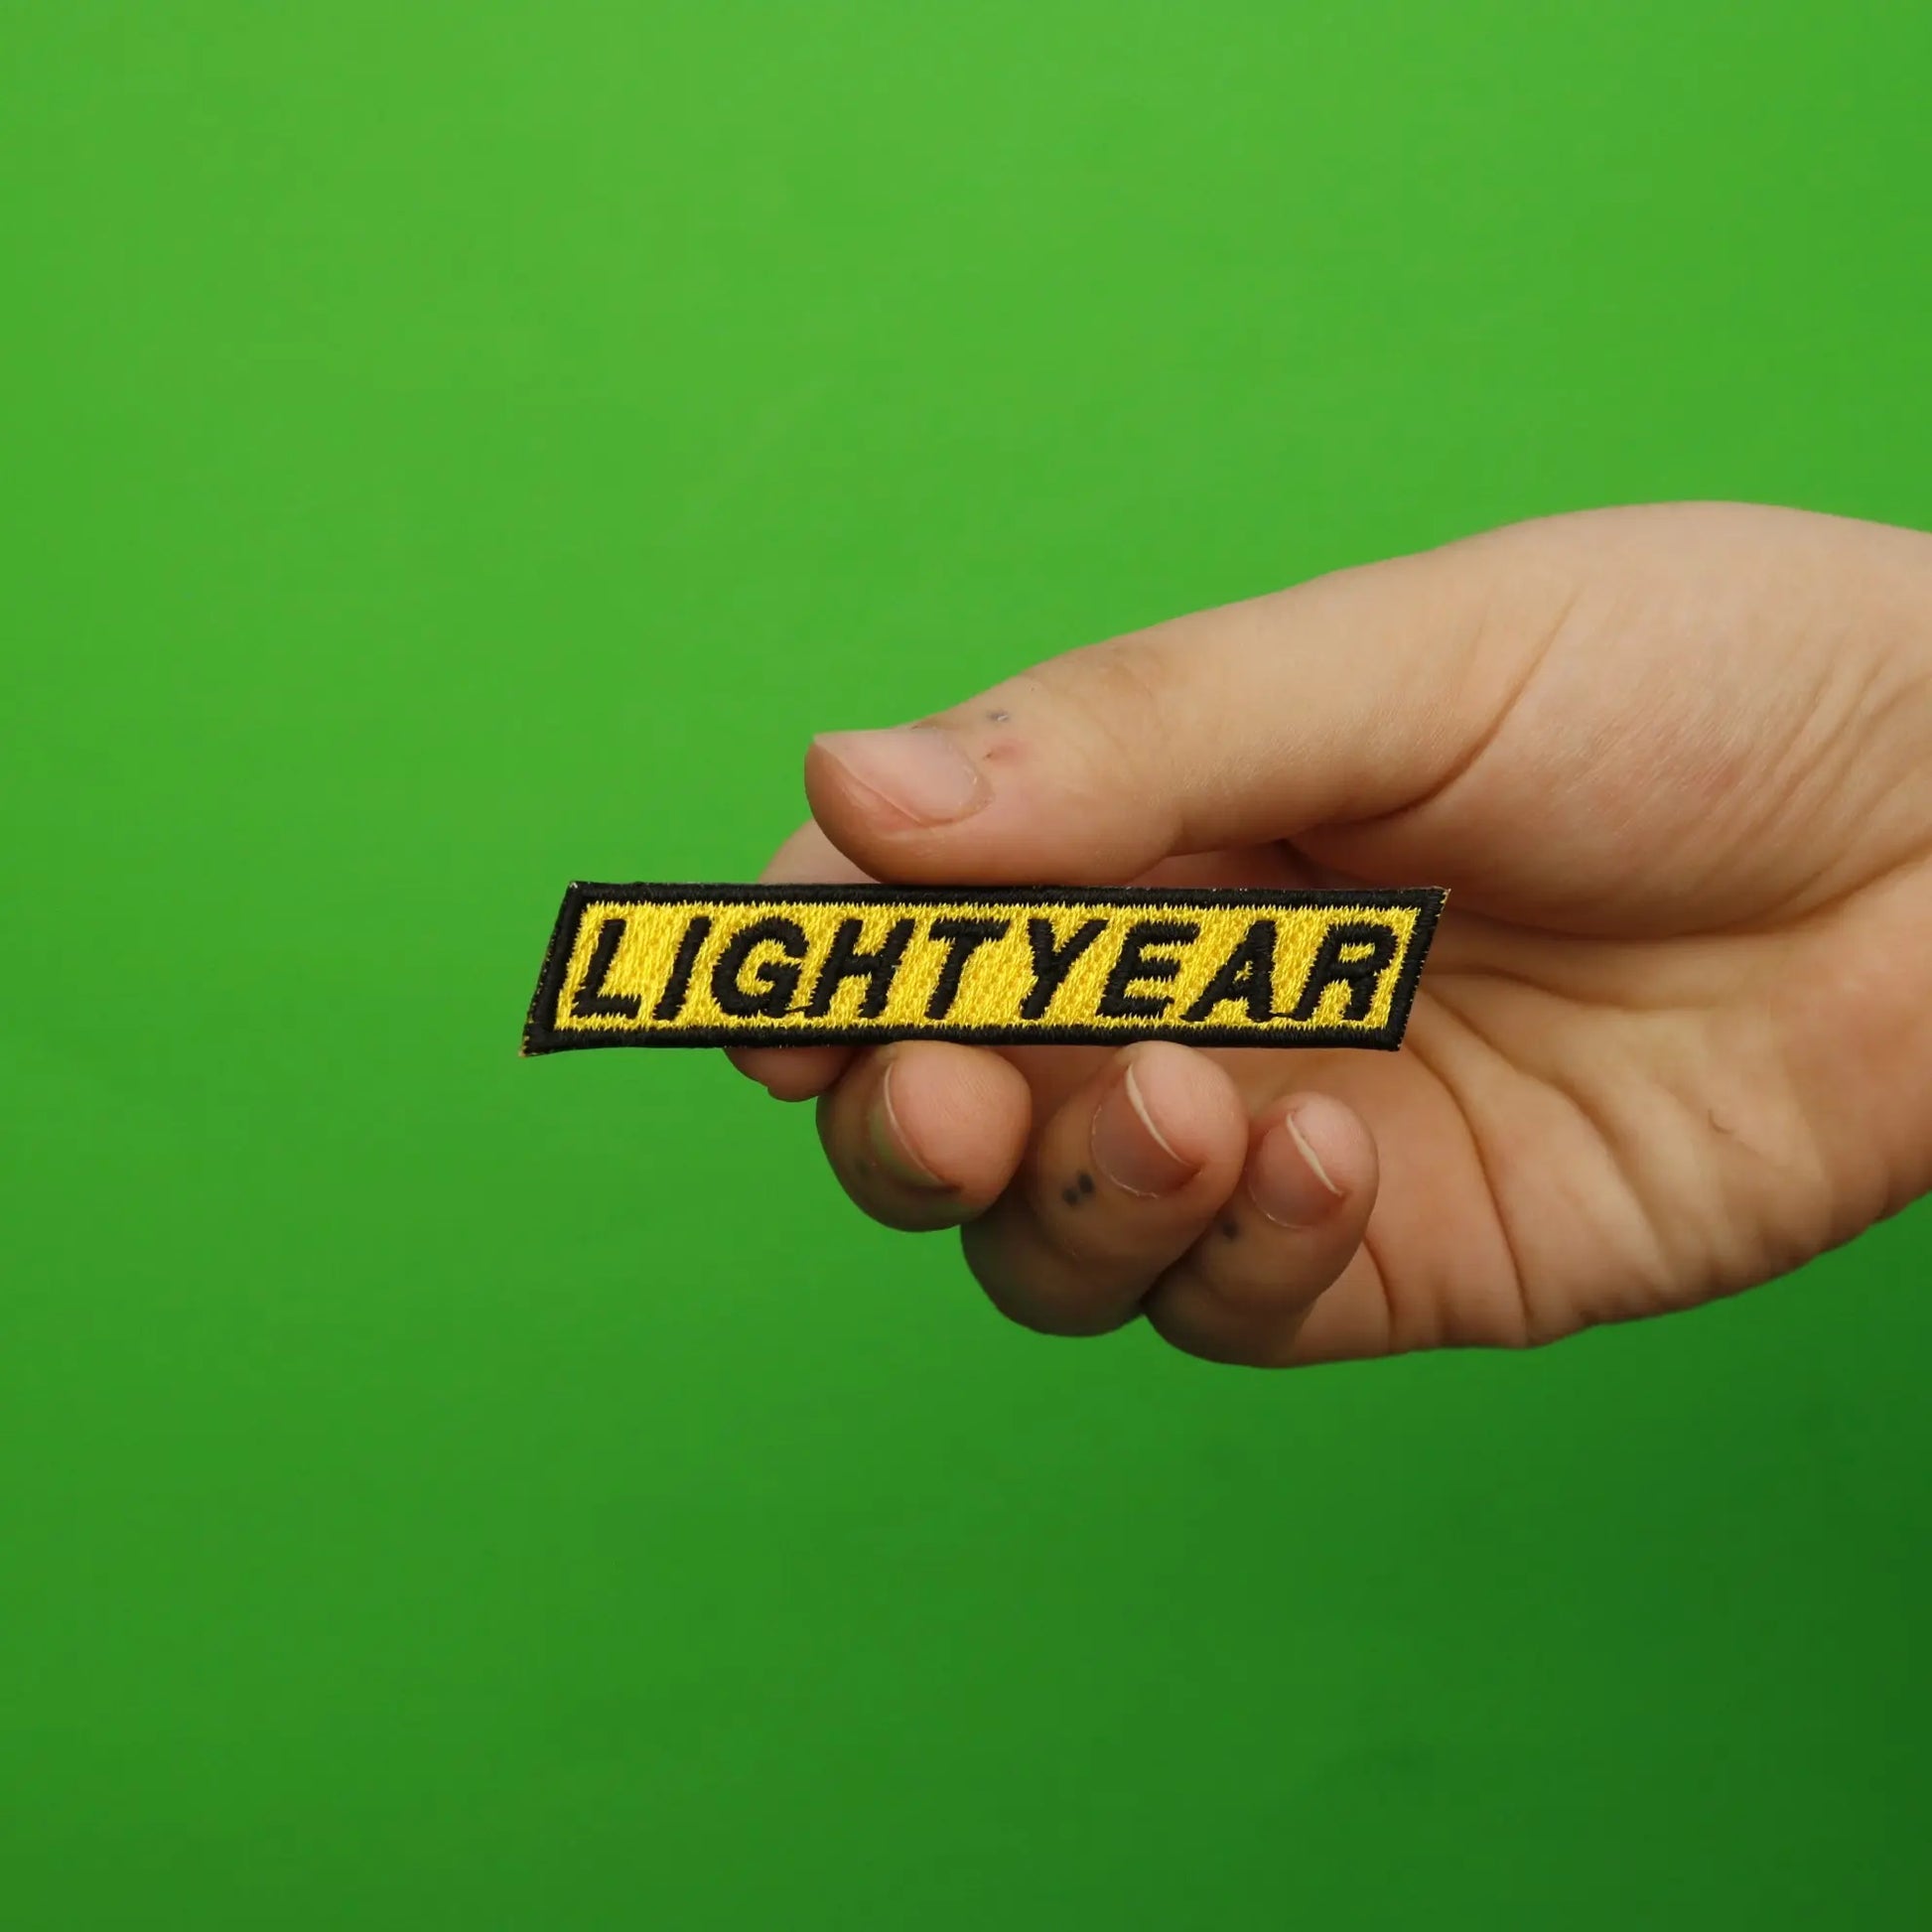 Lightyear Name Tag Embroidered Iron on Patch 